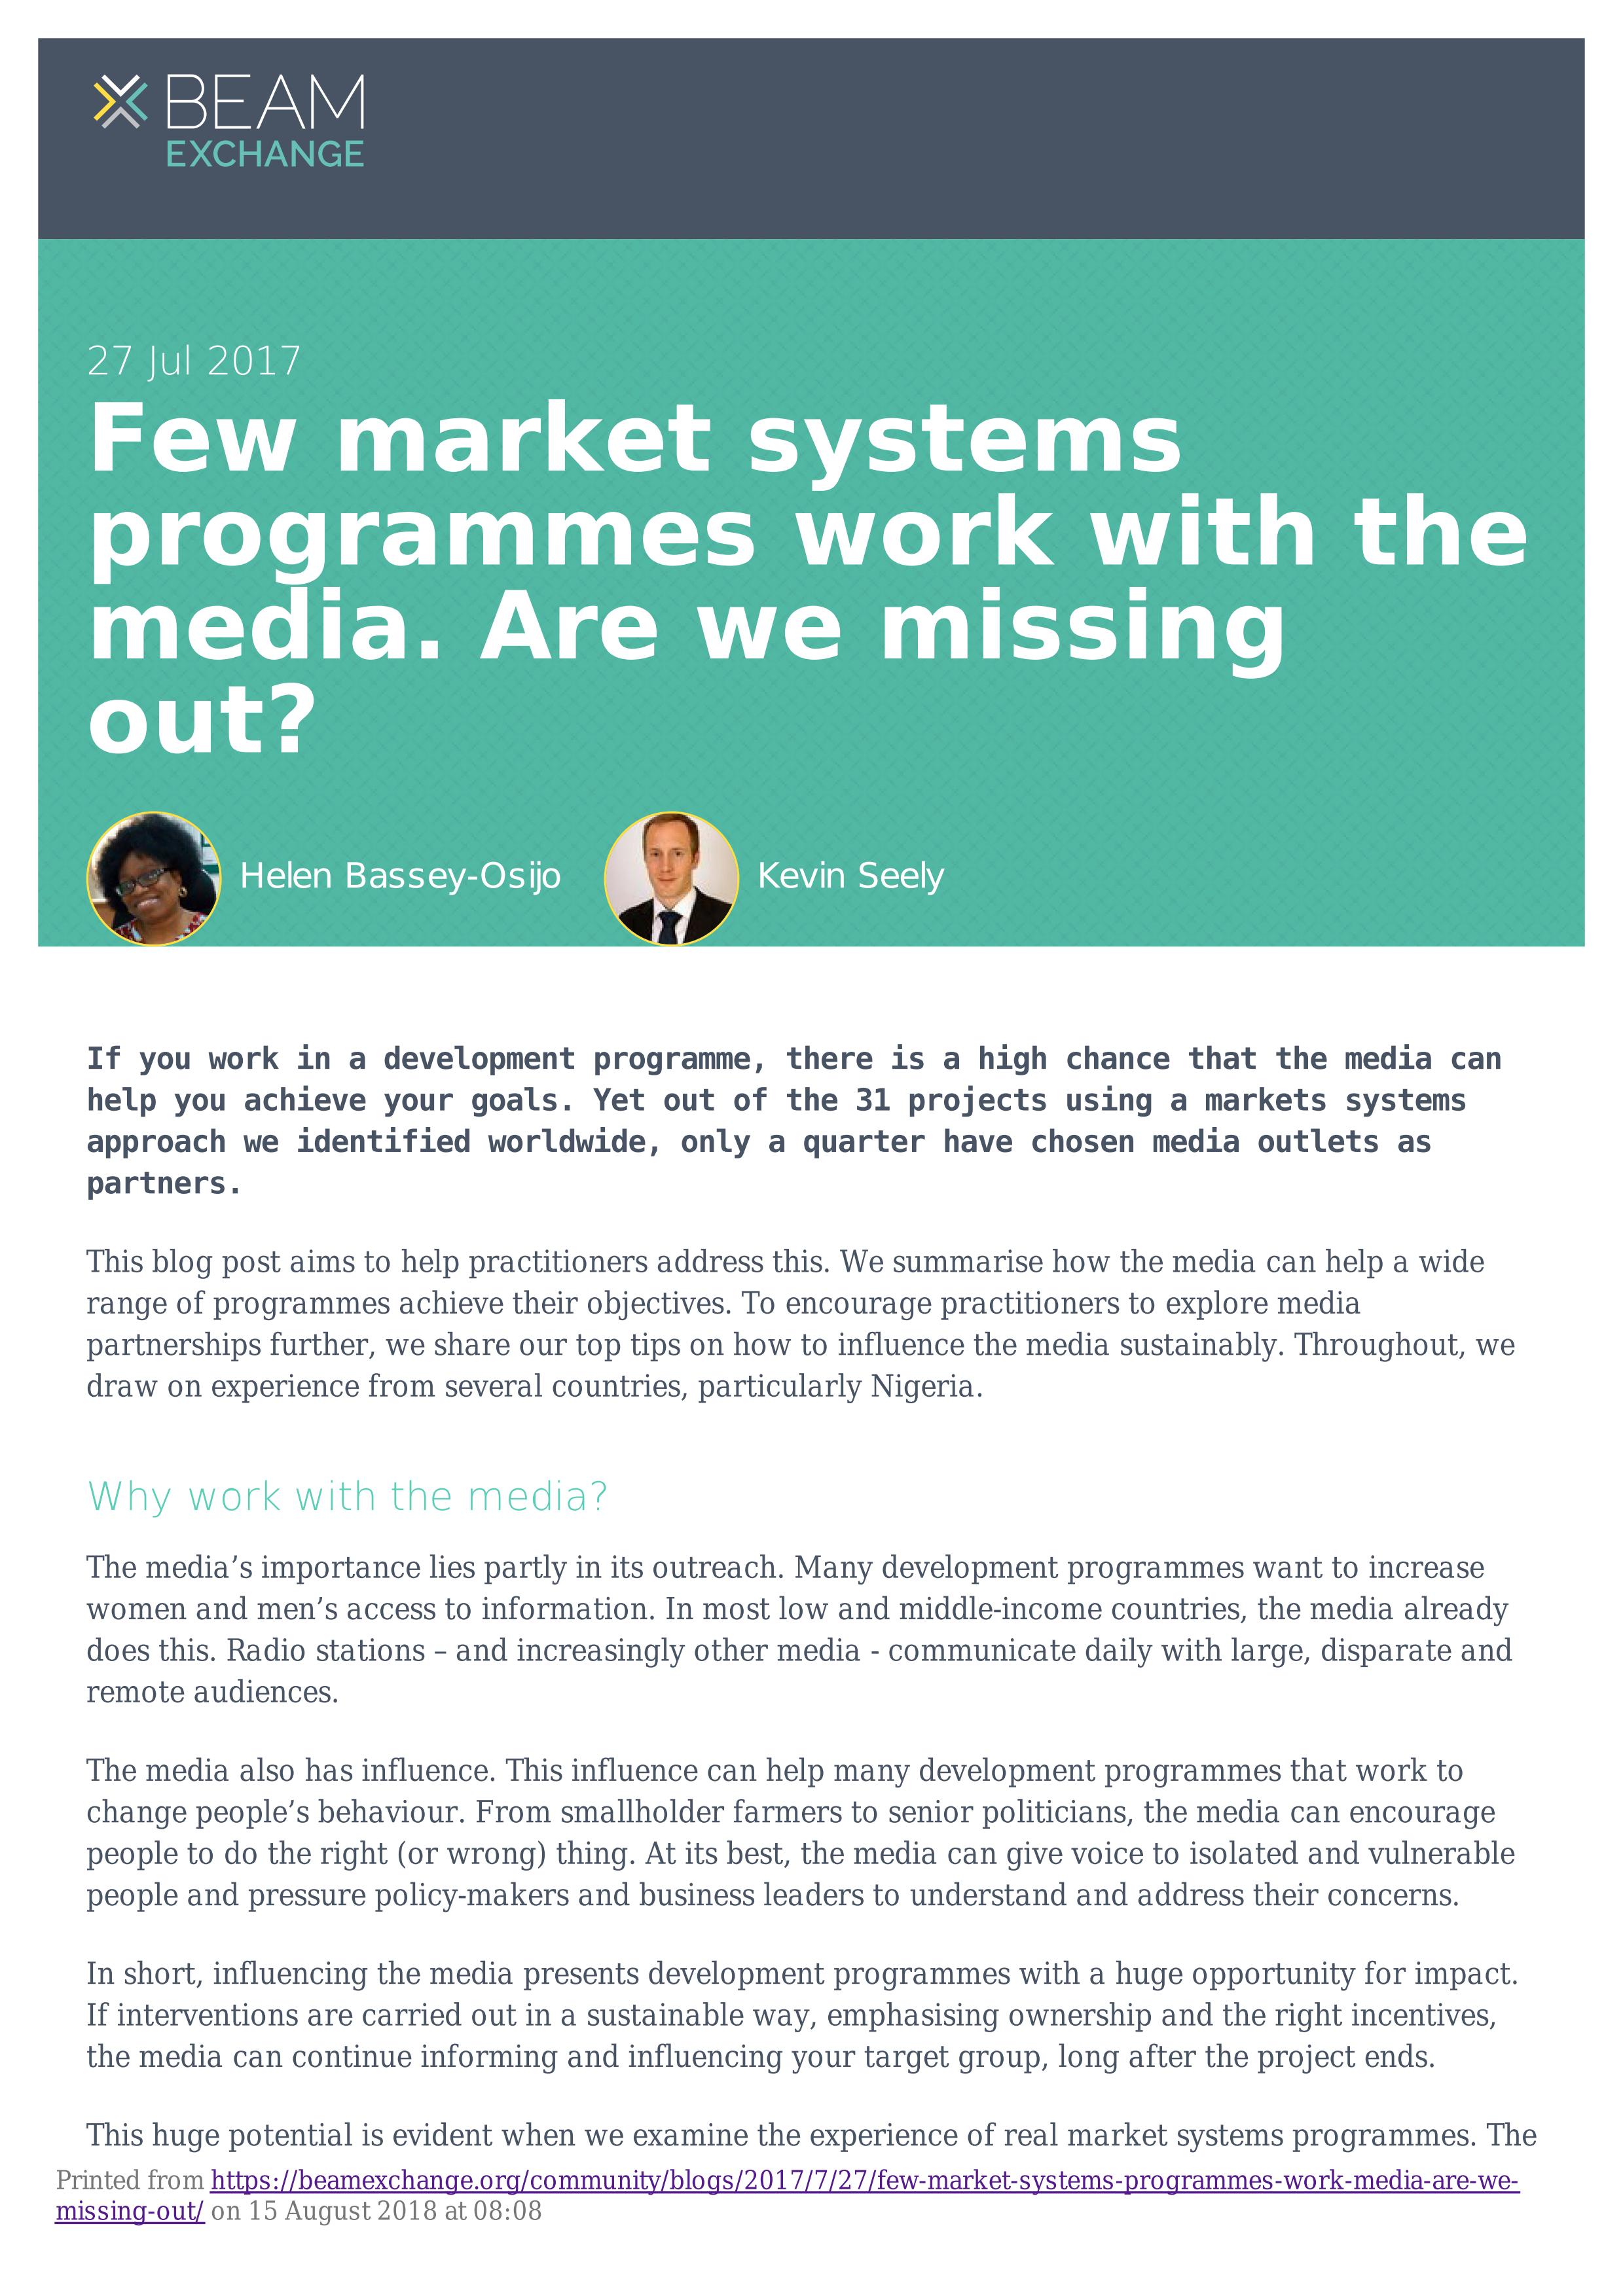 Few market systems programmes work with the media. Are we missing out?